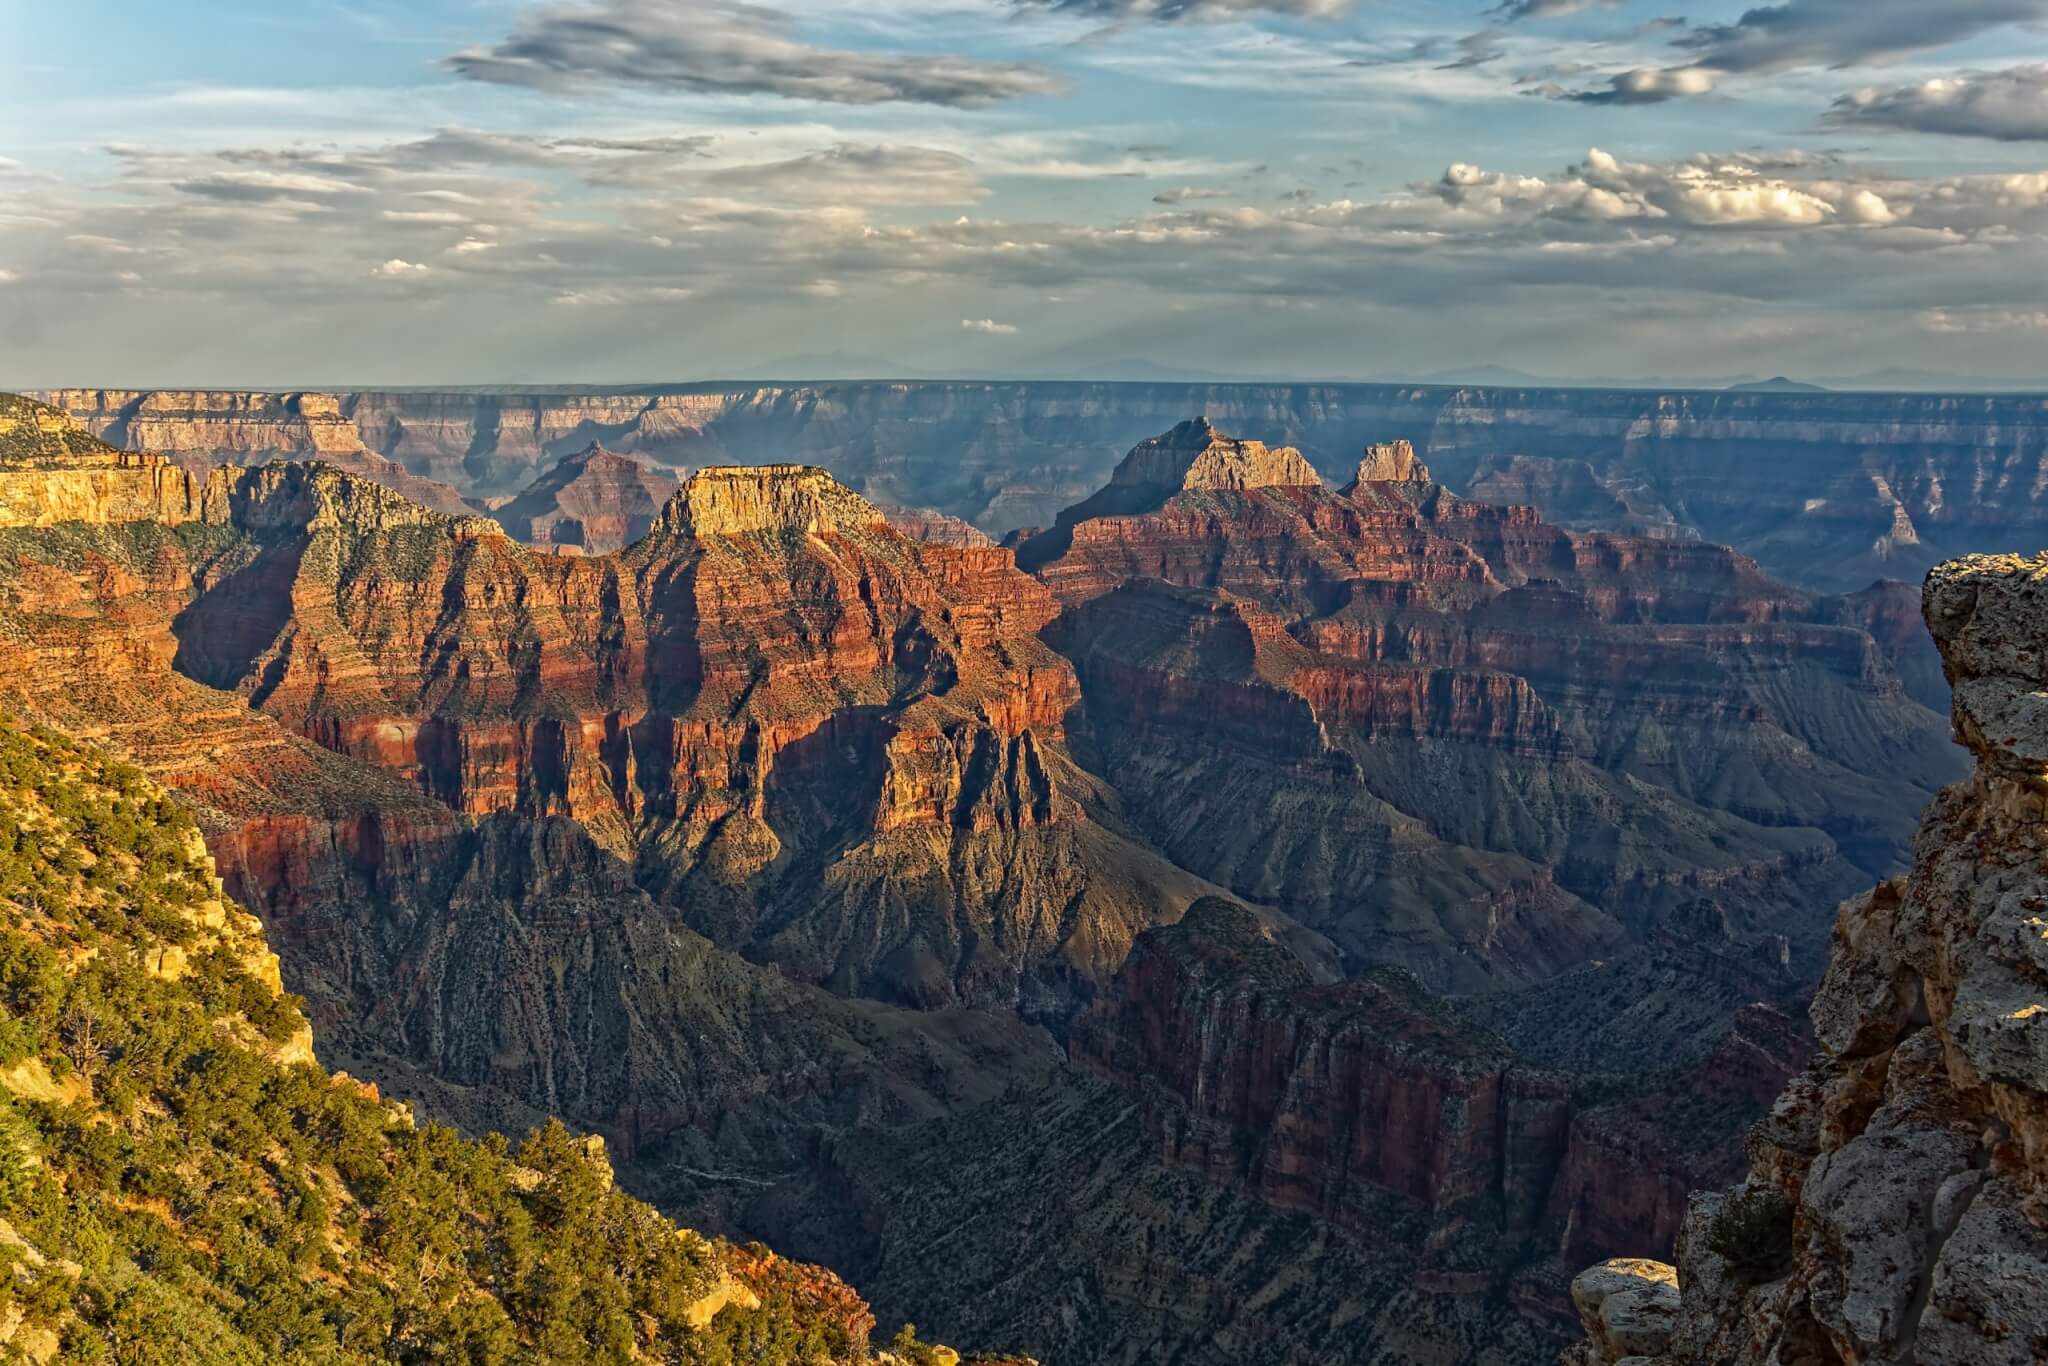 2021 National Park FREE Days! - Grand Canyon